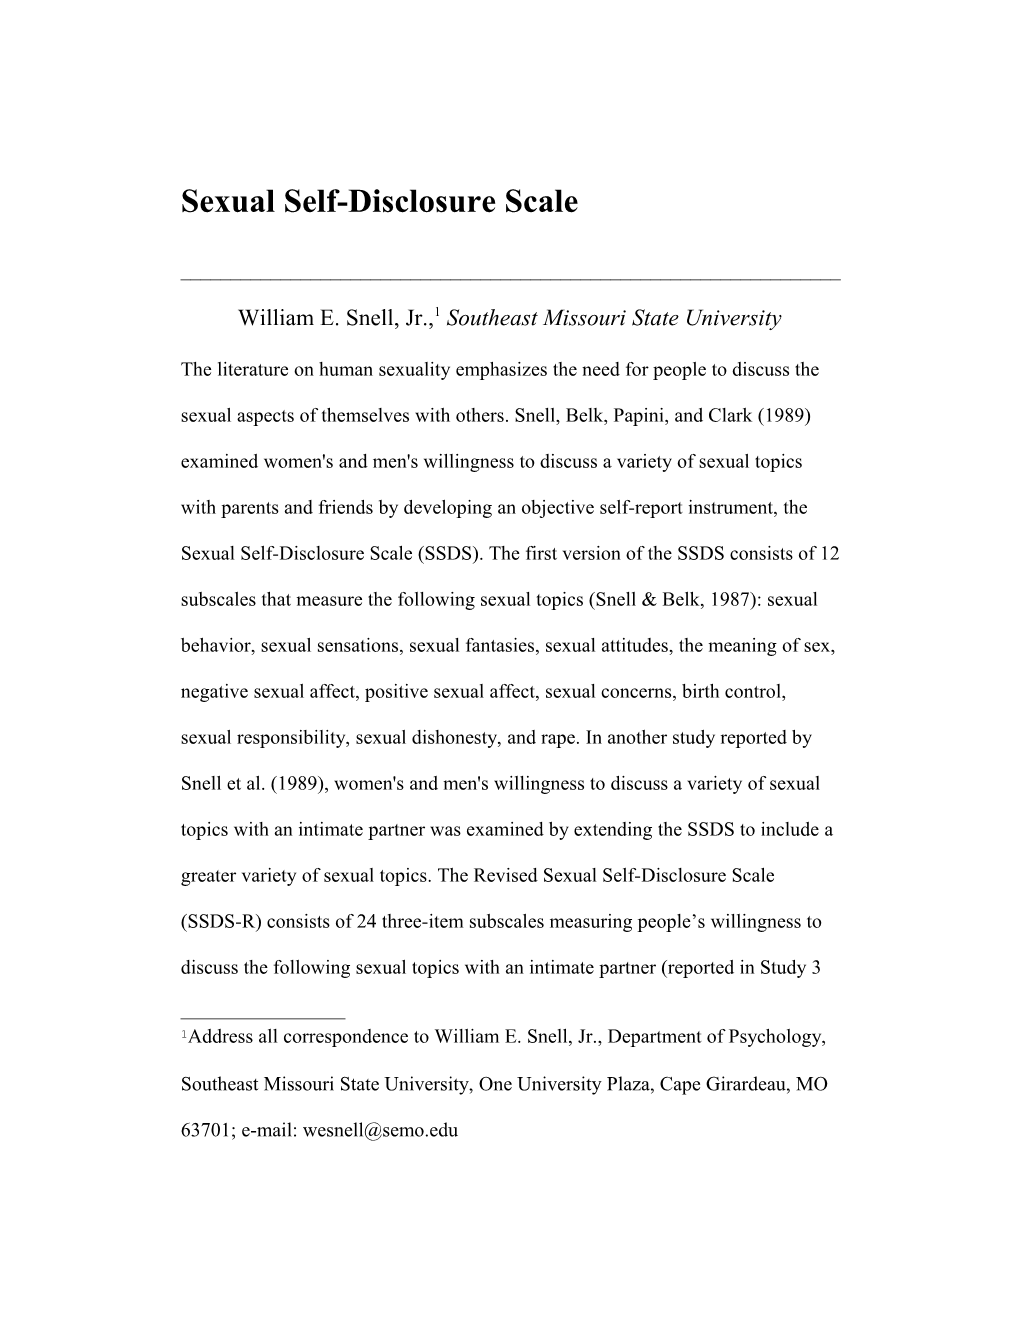 Development of the Sexual Self-Disclosure Scale (SSDS)